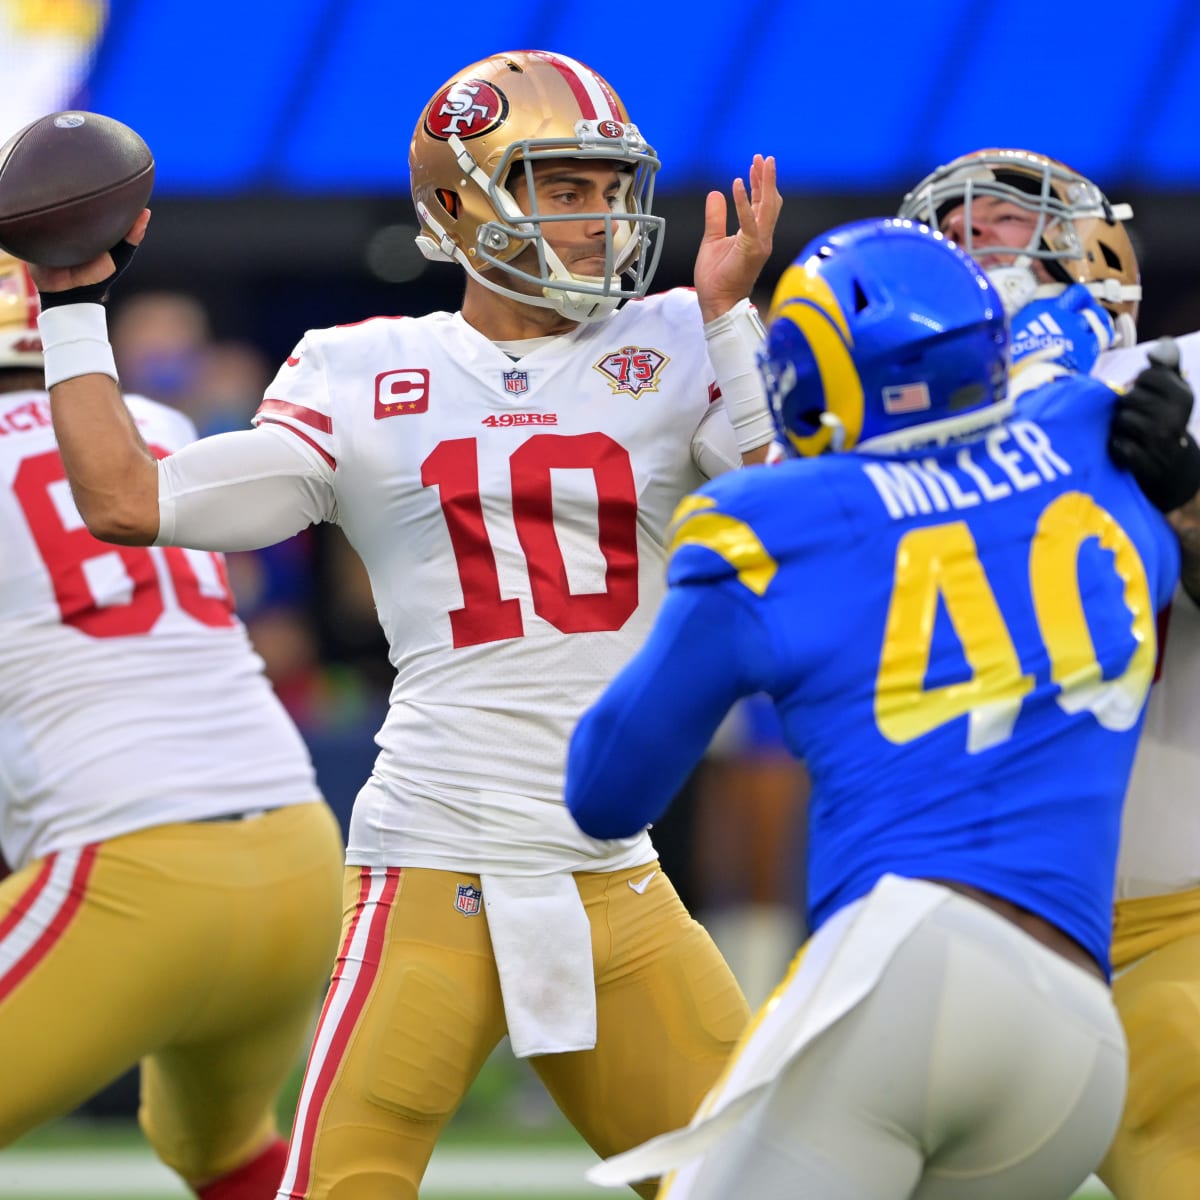 Rams vs 49ers, NFC Championship: L.A. desperately needs a comeback - Turf  Show Times